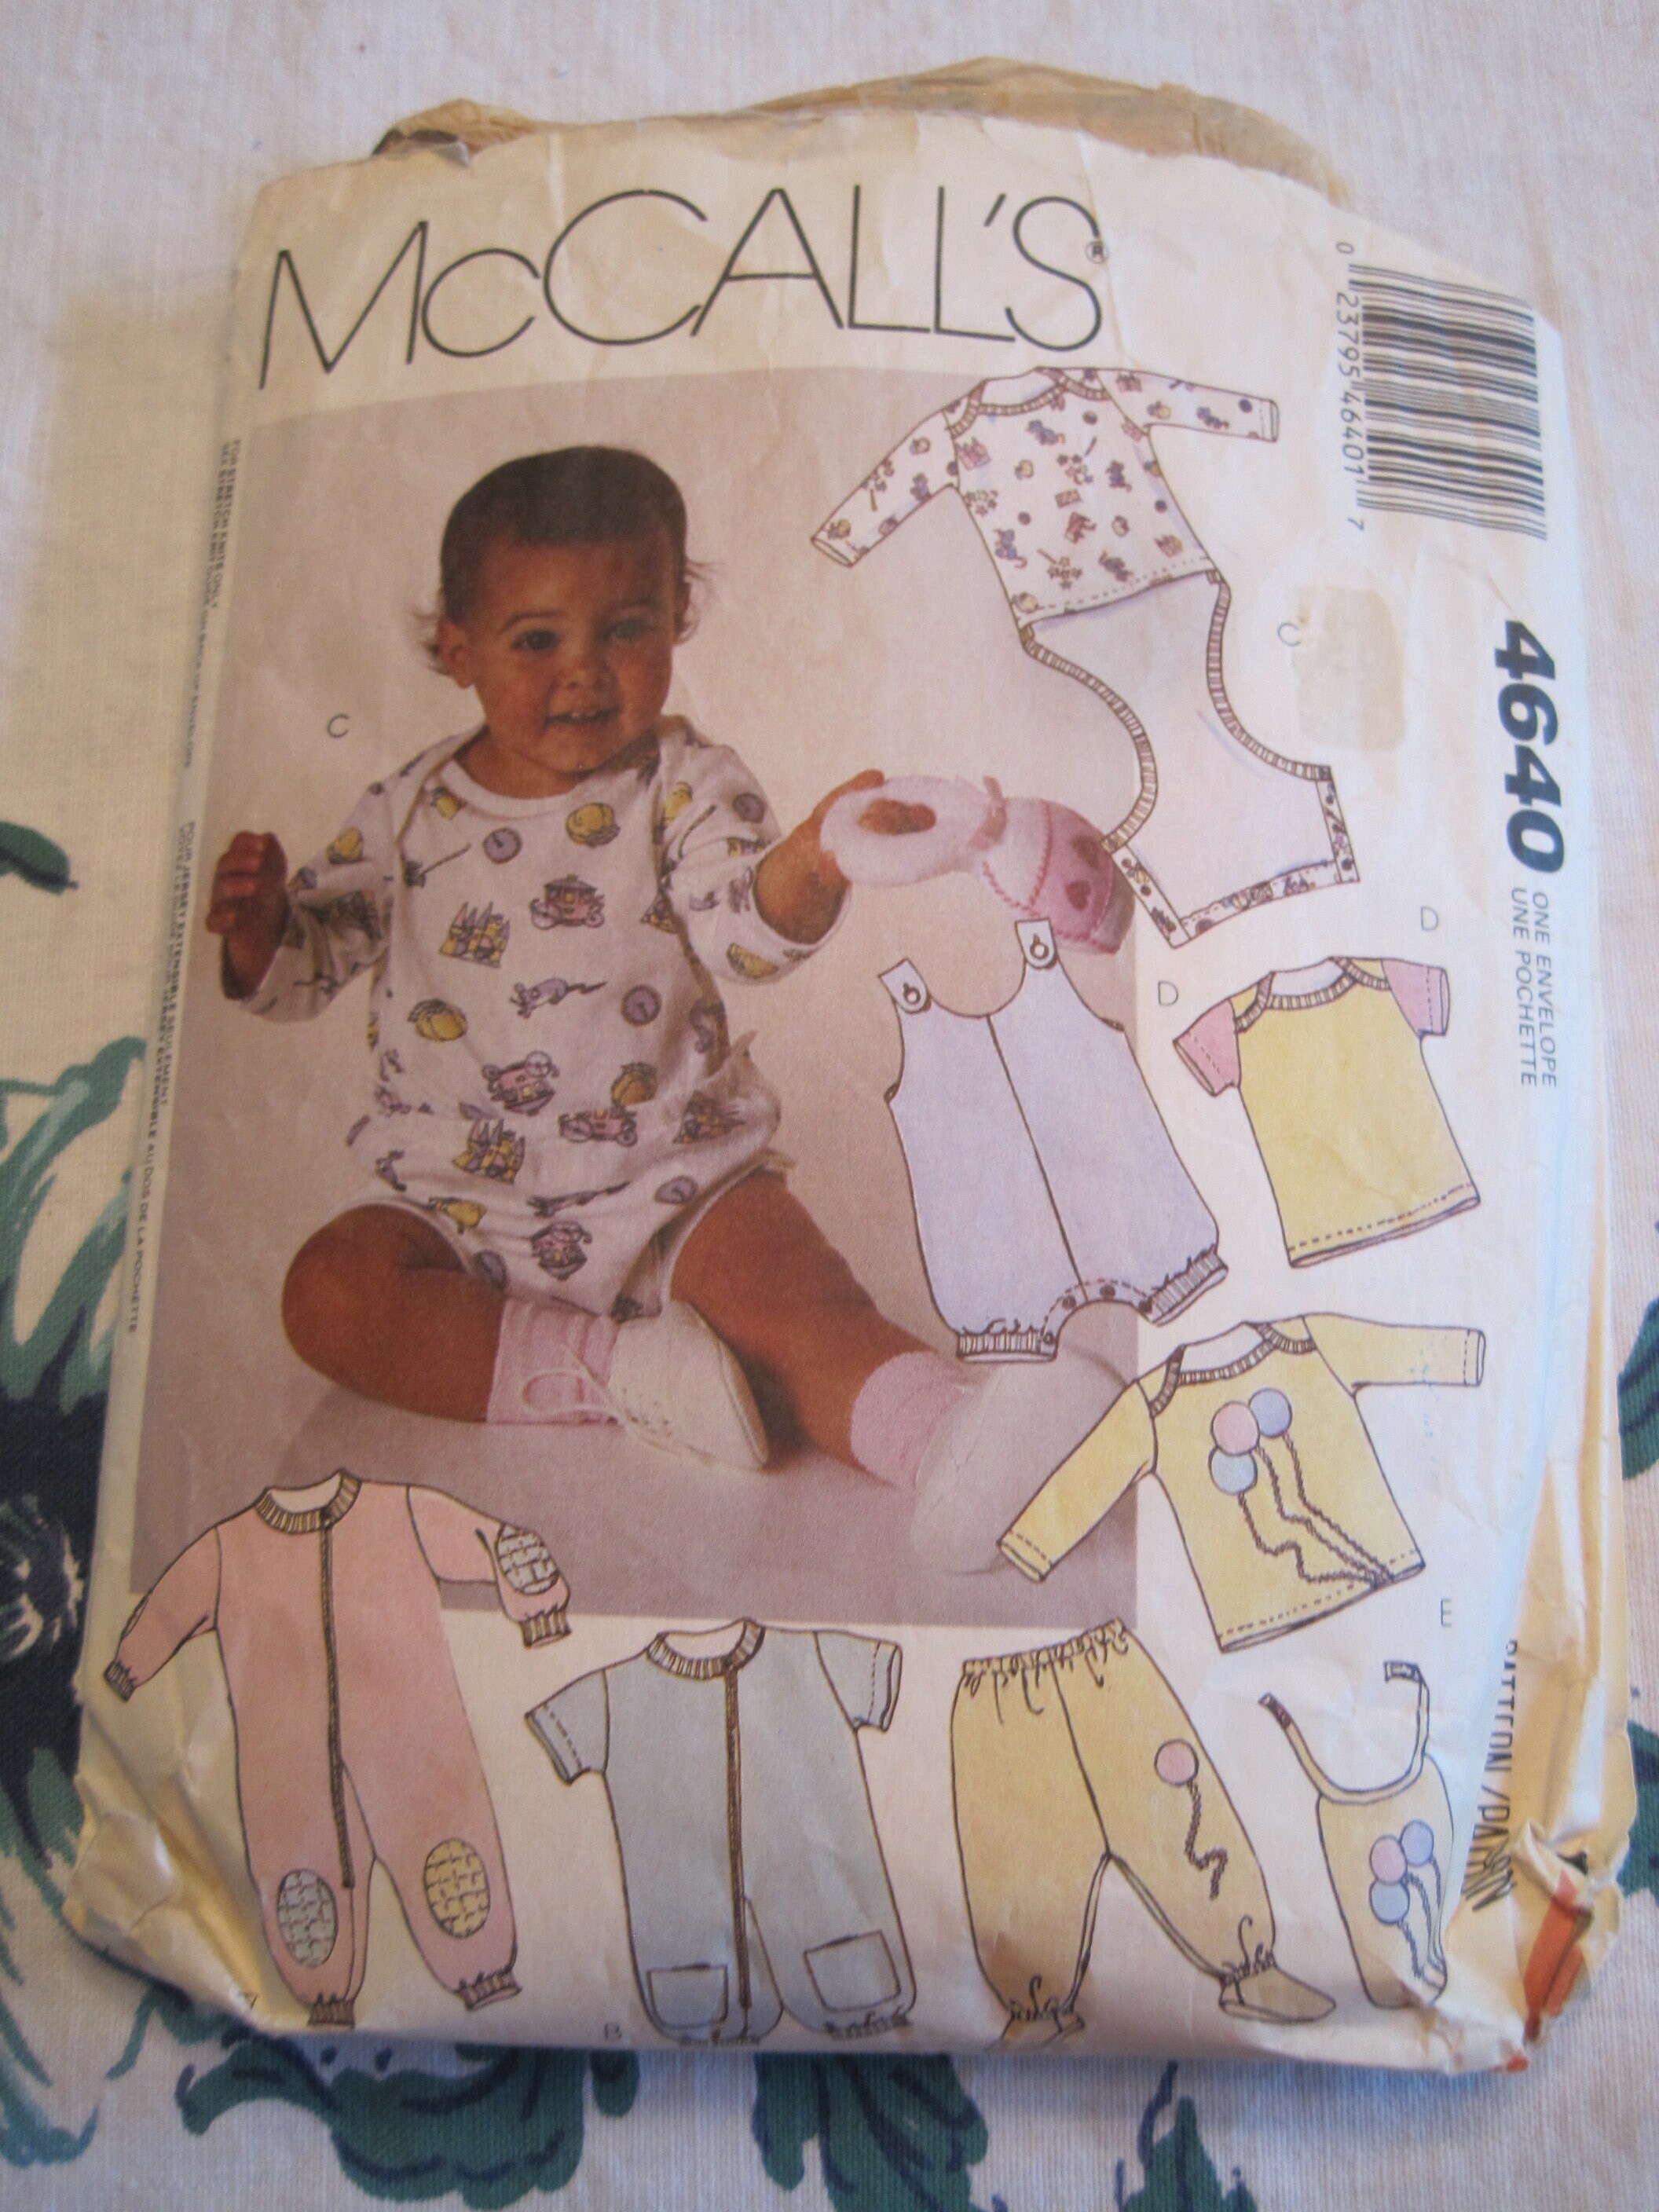 McCall Pattern 4640: 1920s Cute Toddler Girls Coat Size 2 Vintage